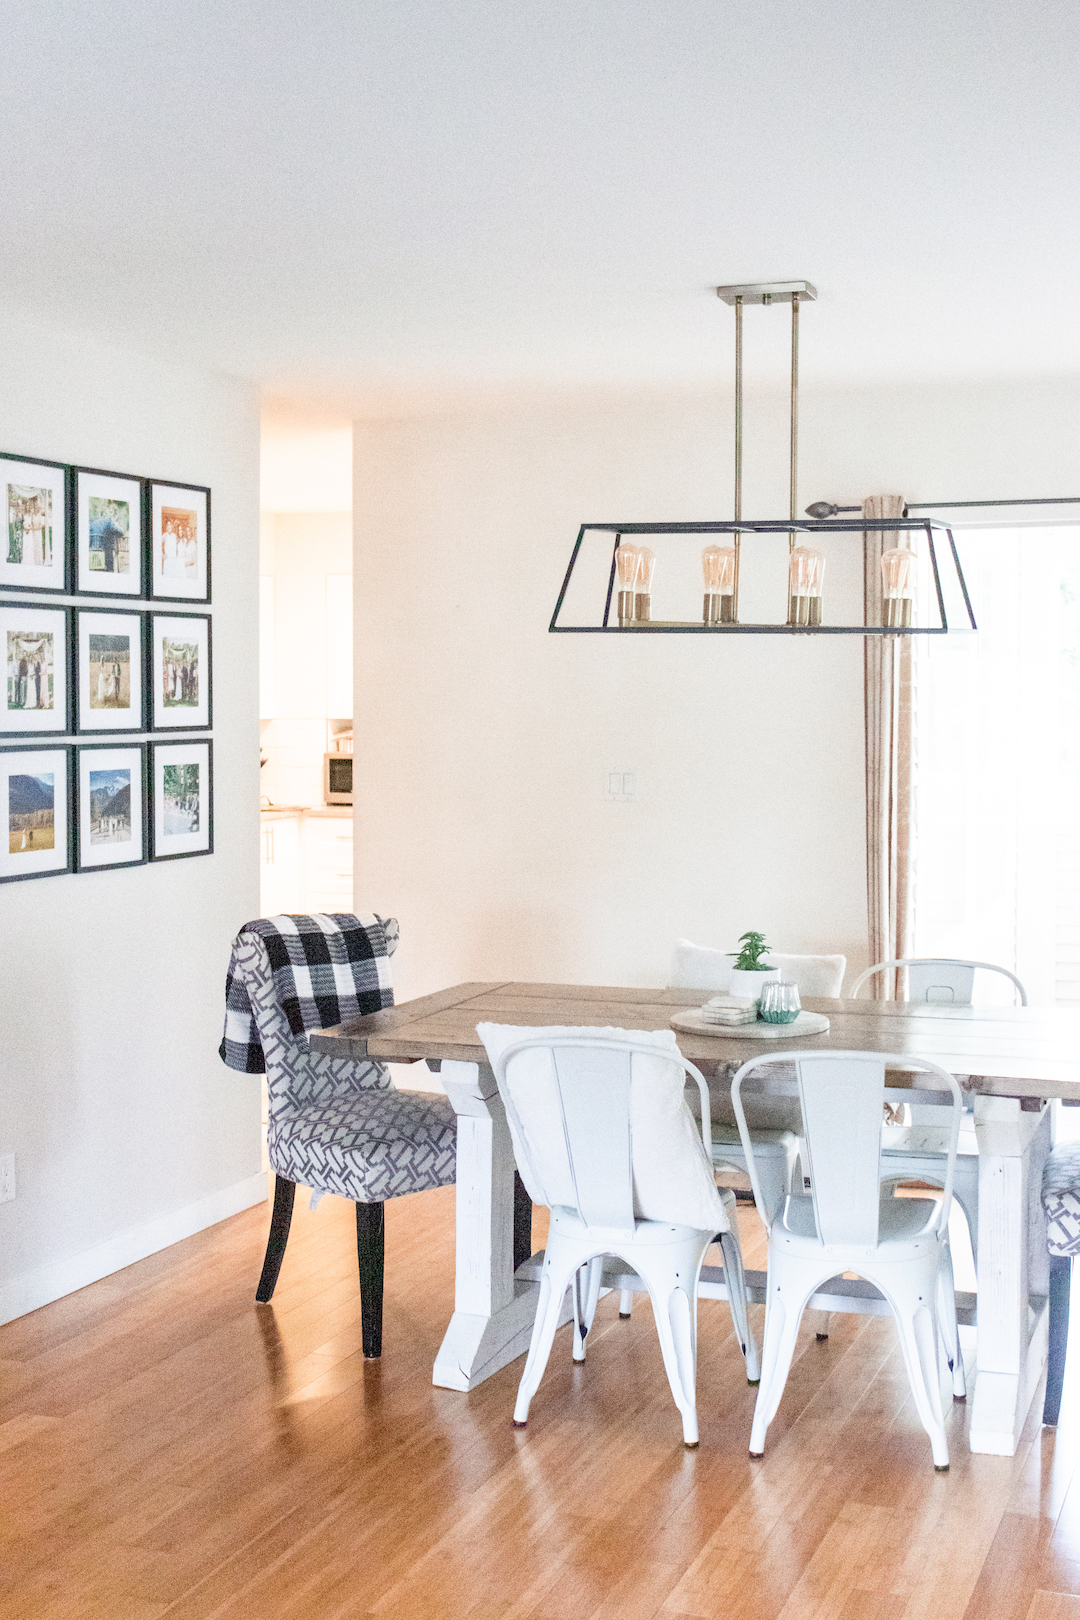 Home Tour Series: Our Dining Room